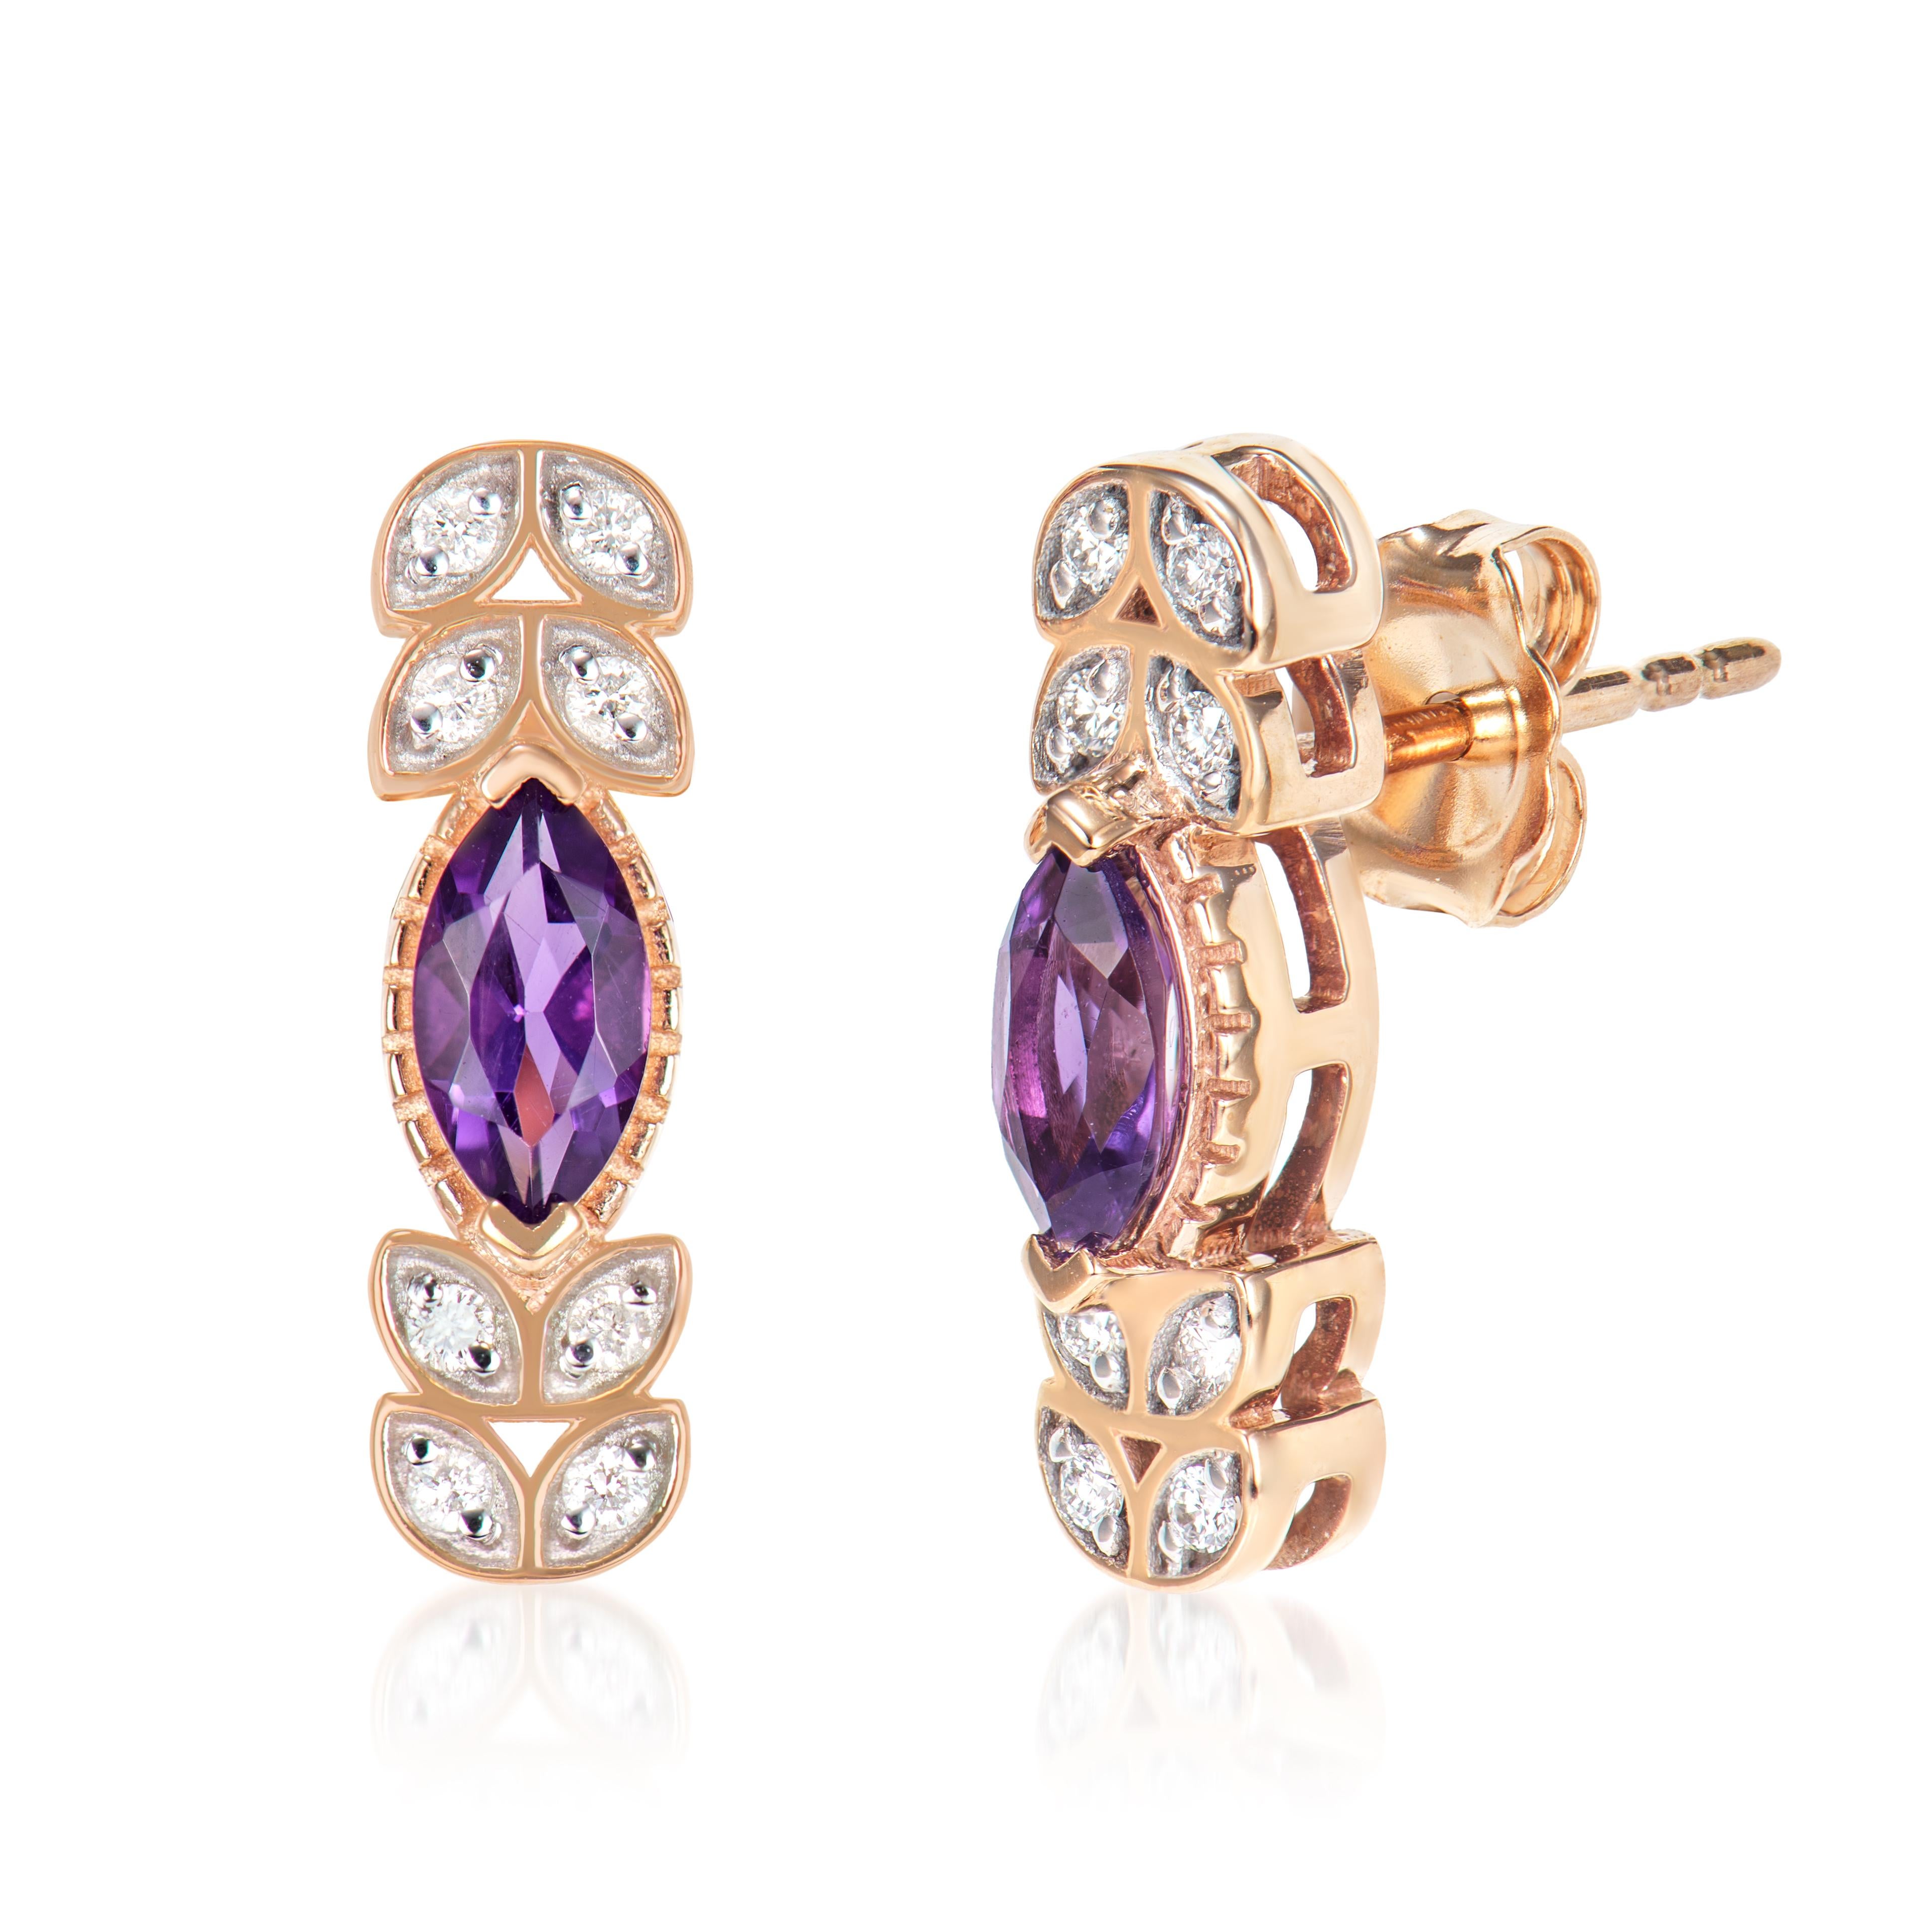 Marquise Cut 0.99 Carat Amethyst Drop Earrings in 14Karat Rose Gold with White Diamond. For Sale